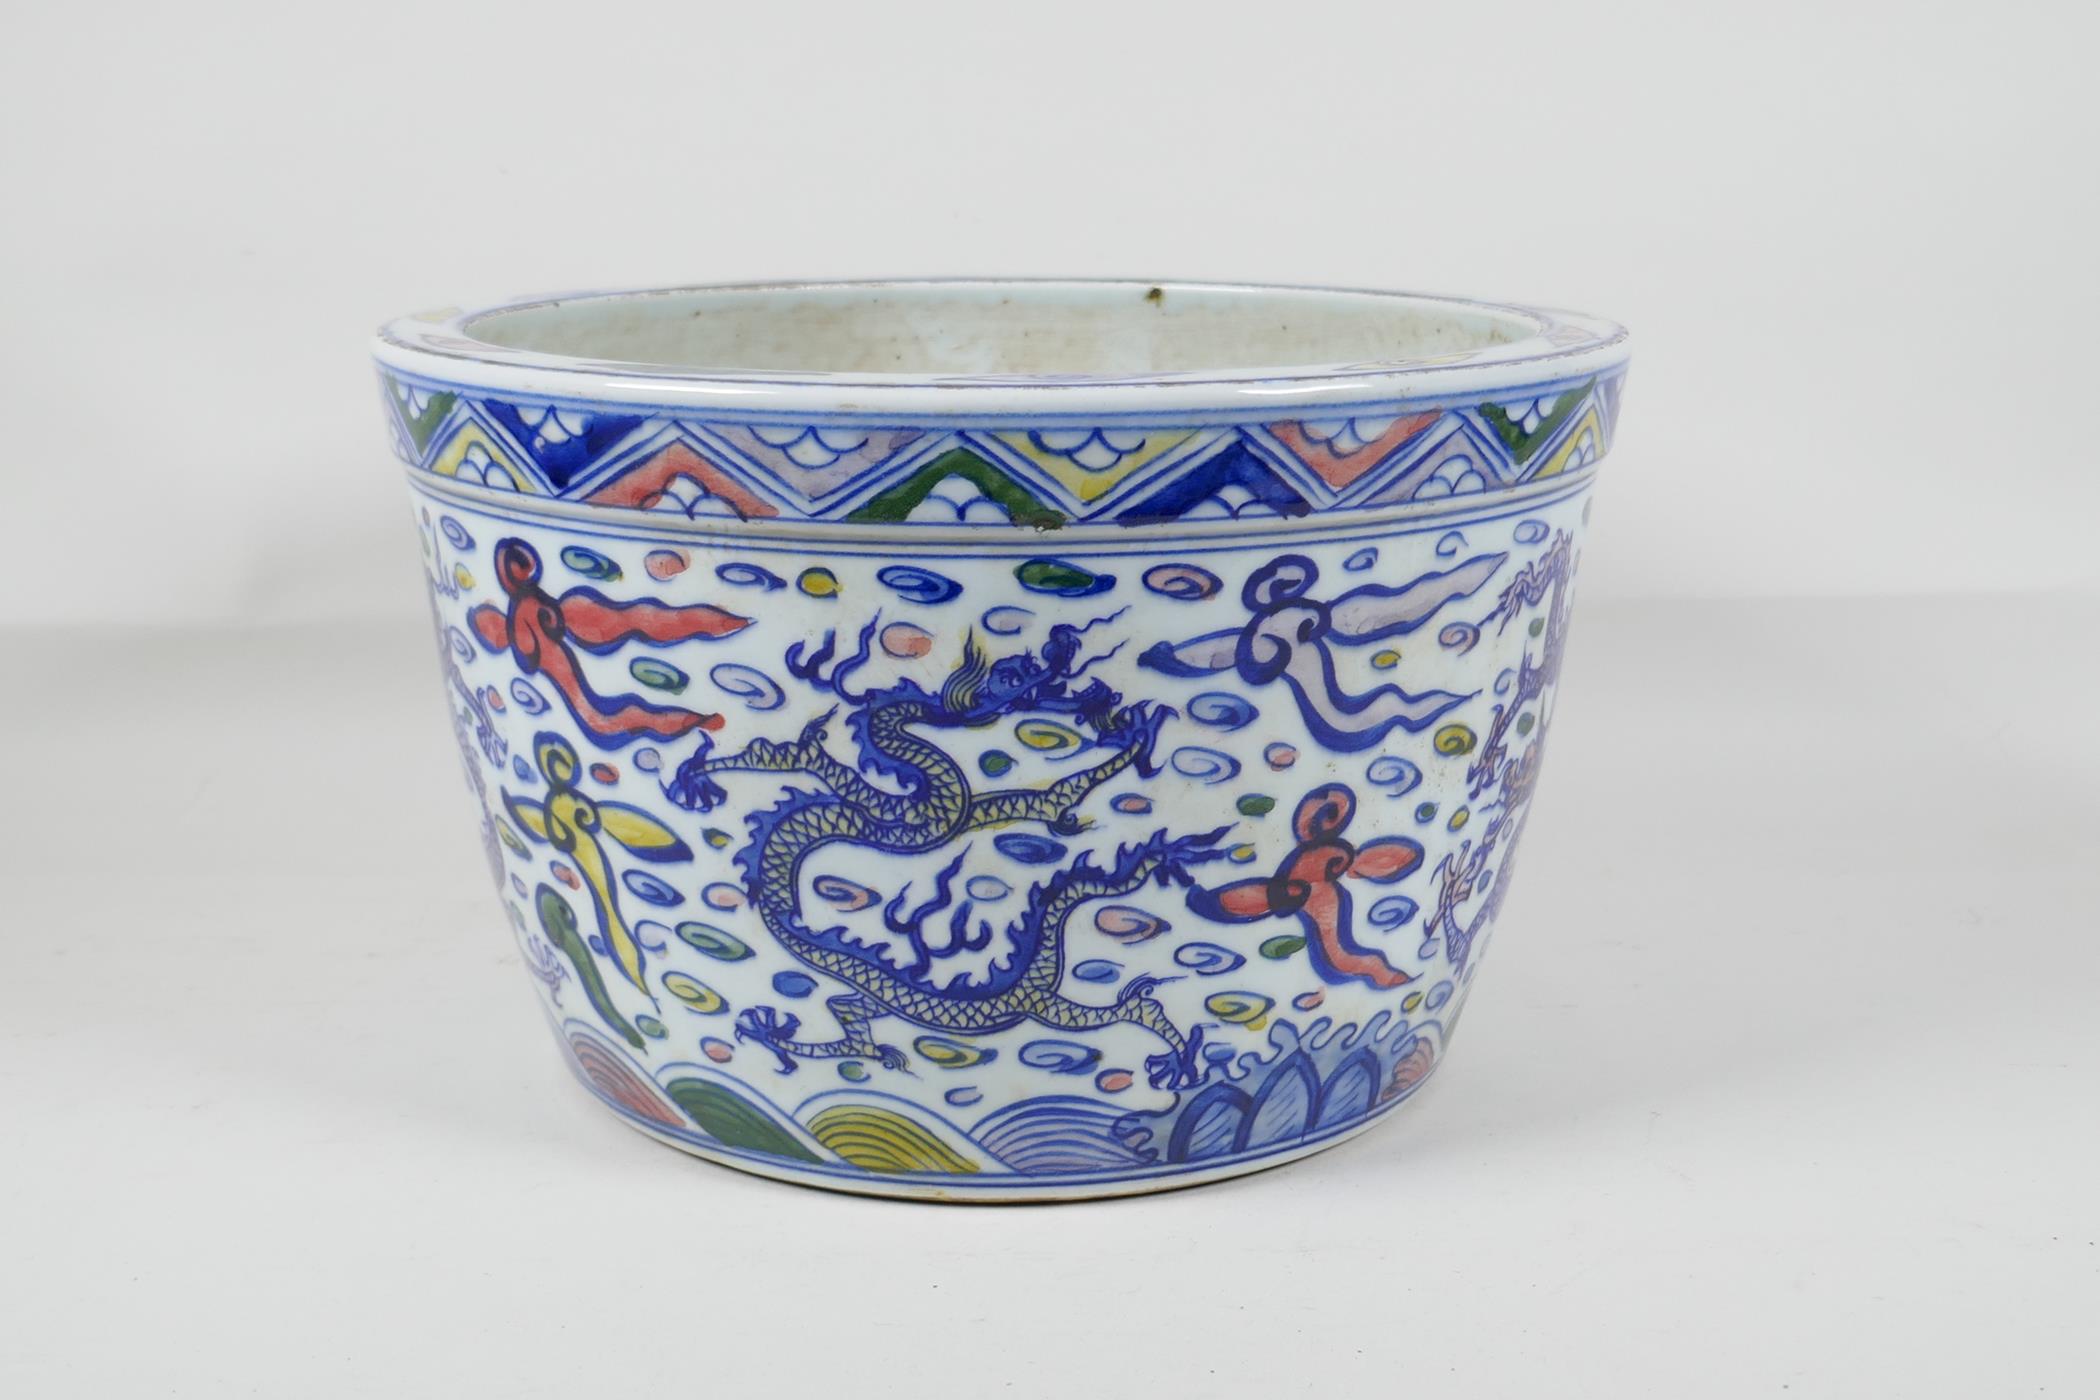 A Chinese Wucai style porcelain jardinere, decorated with dragons & the flaming pearl, 6 character - Image 3 of 7